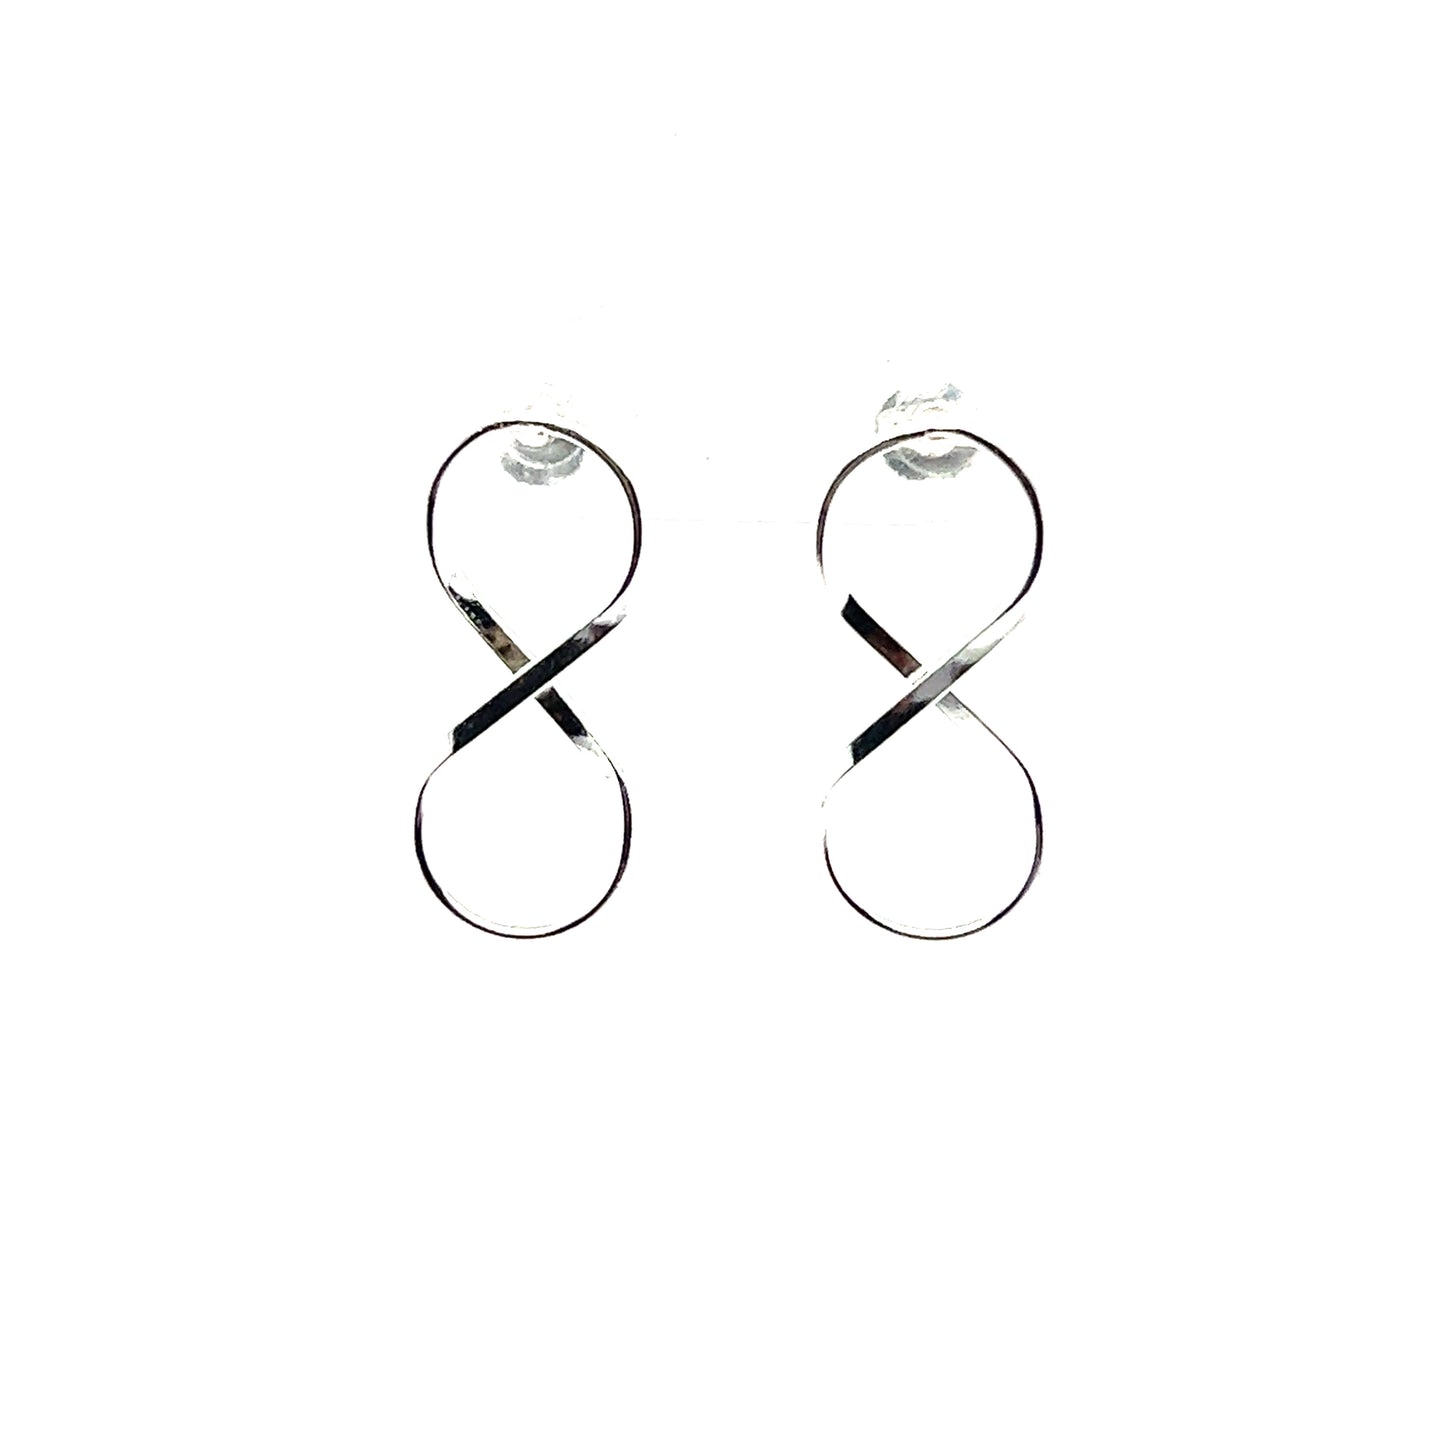 A pair of Delicate Infinity Shaped Earrings by Super Silver with a modern design on a white background.